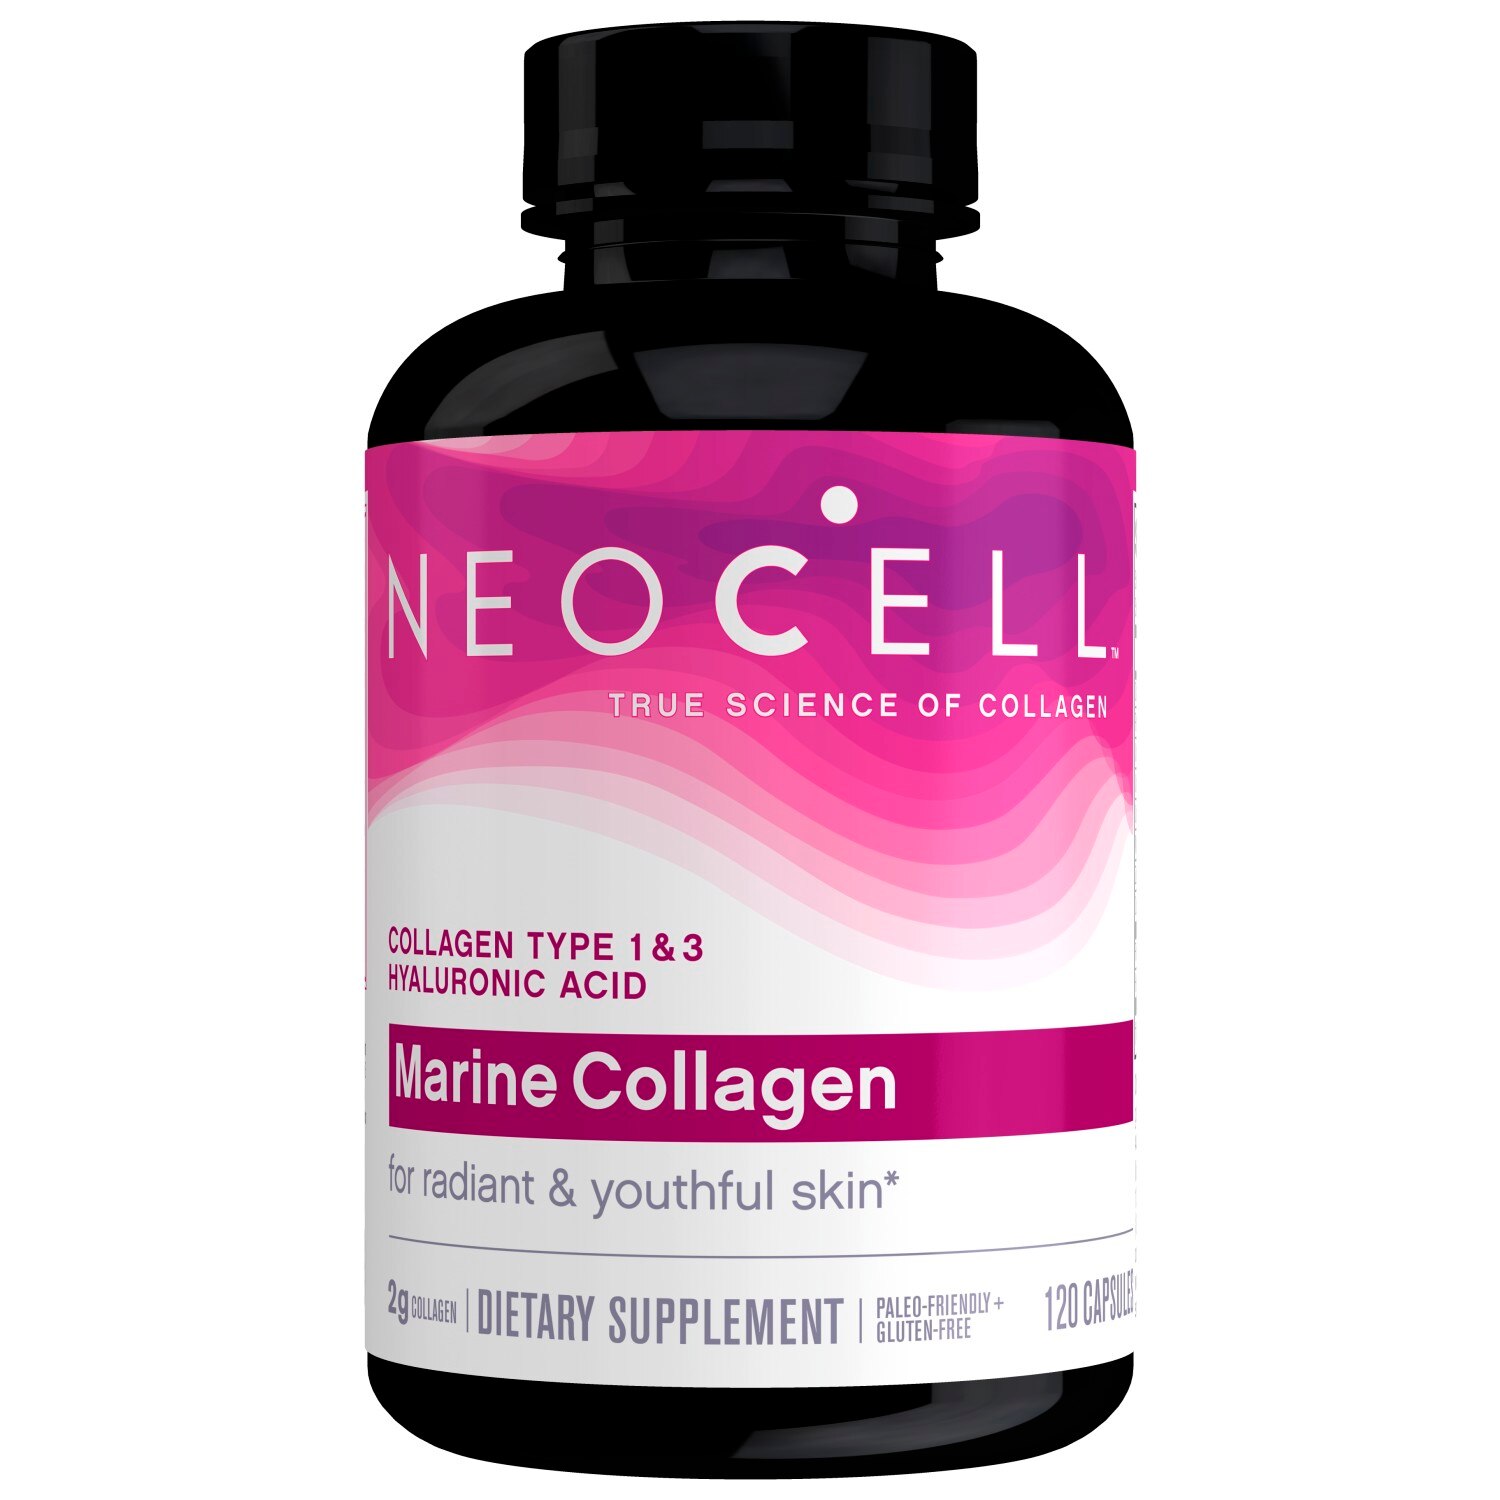 NeoCell Marine Collagen, Collagen Type 1 & 3 with Hyaluronic Acid, 120 CT